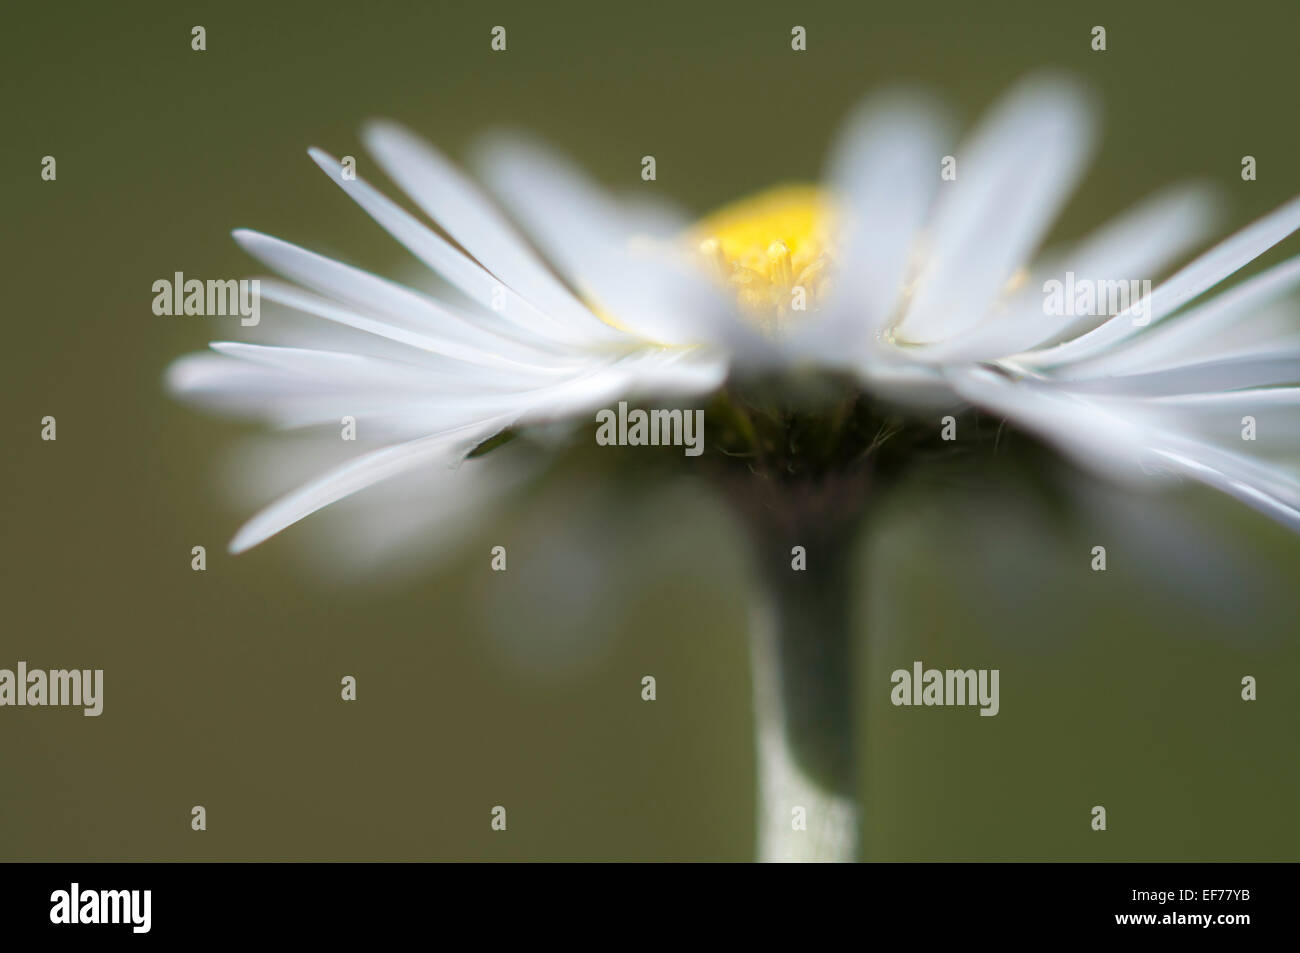 Daisy (Bellis Perennis) in side view with blurry white petals and yellow middle. A single stem in close up. Stock Photo